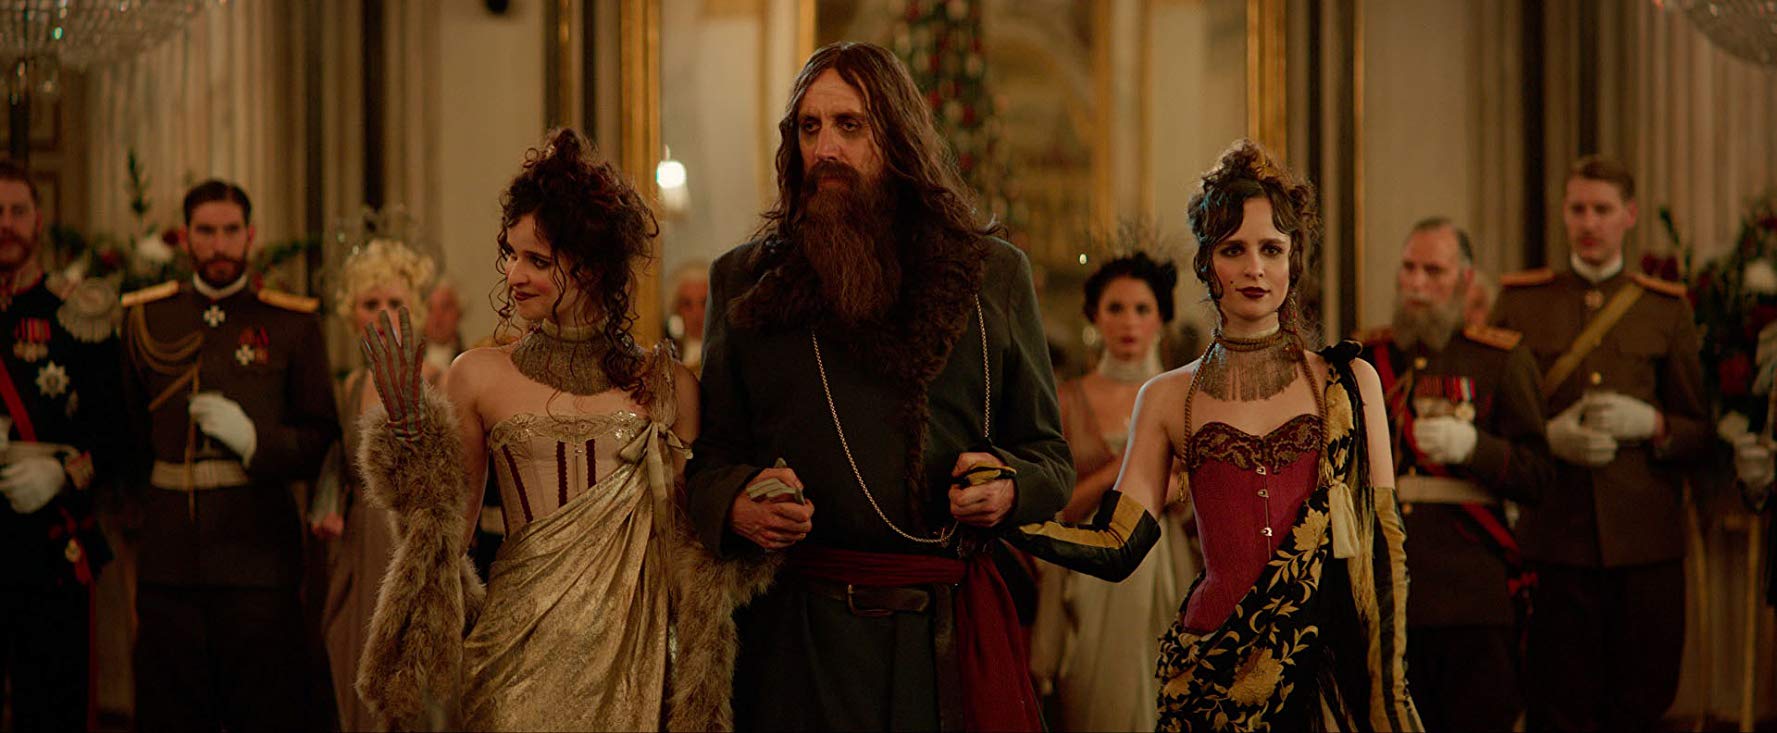 Rhys Ifans is seen as Rasputin in a still image from “The King’s Man”.